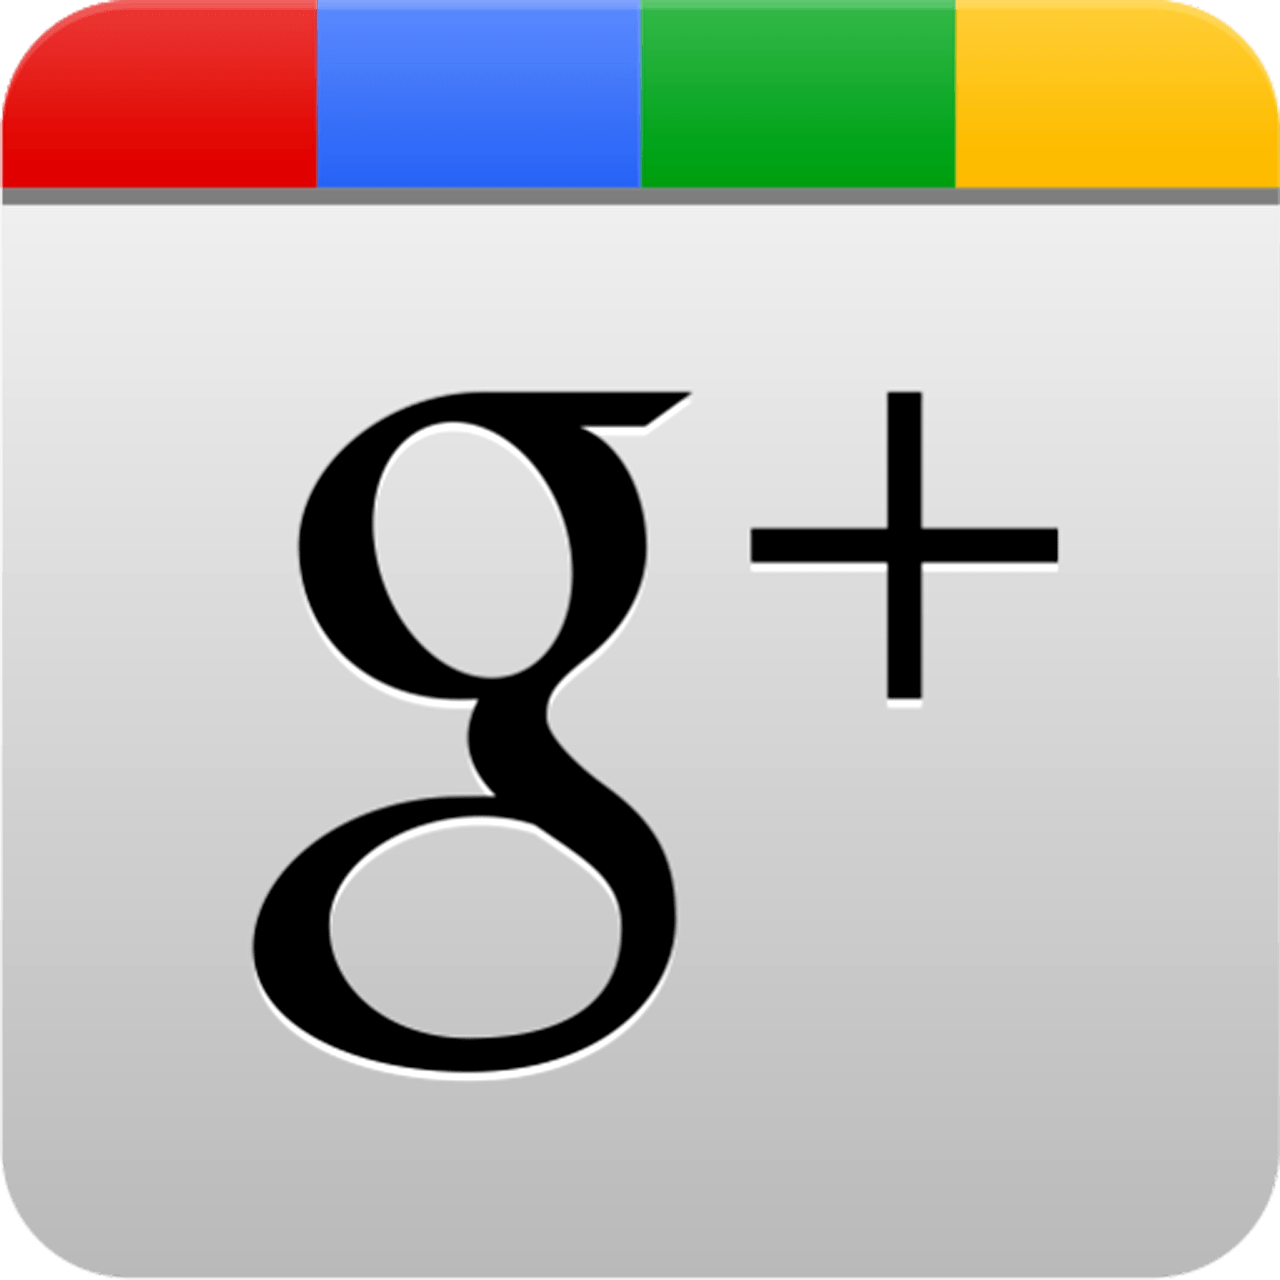 Find Us Google Plus Logo - Google Plus Logo Transparent PNG Pictures - Free Icons and PNG ...